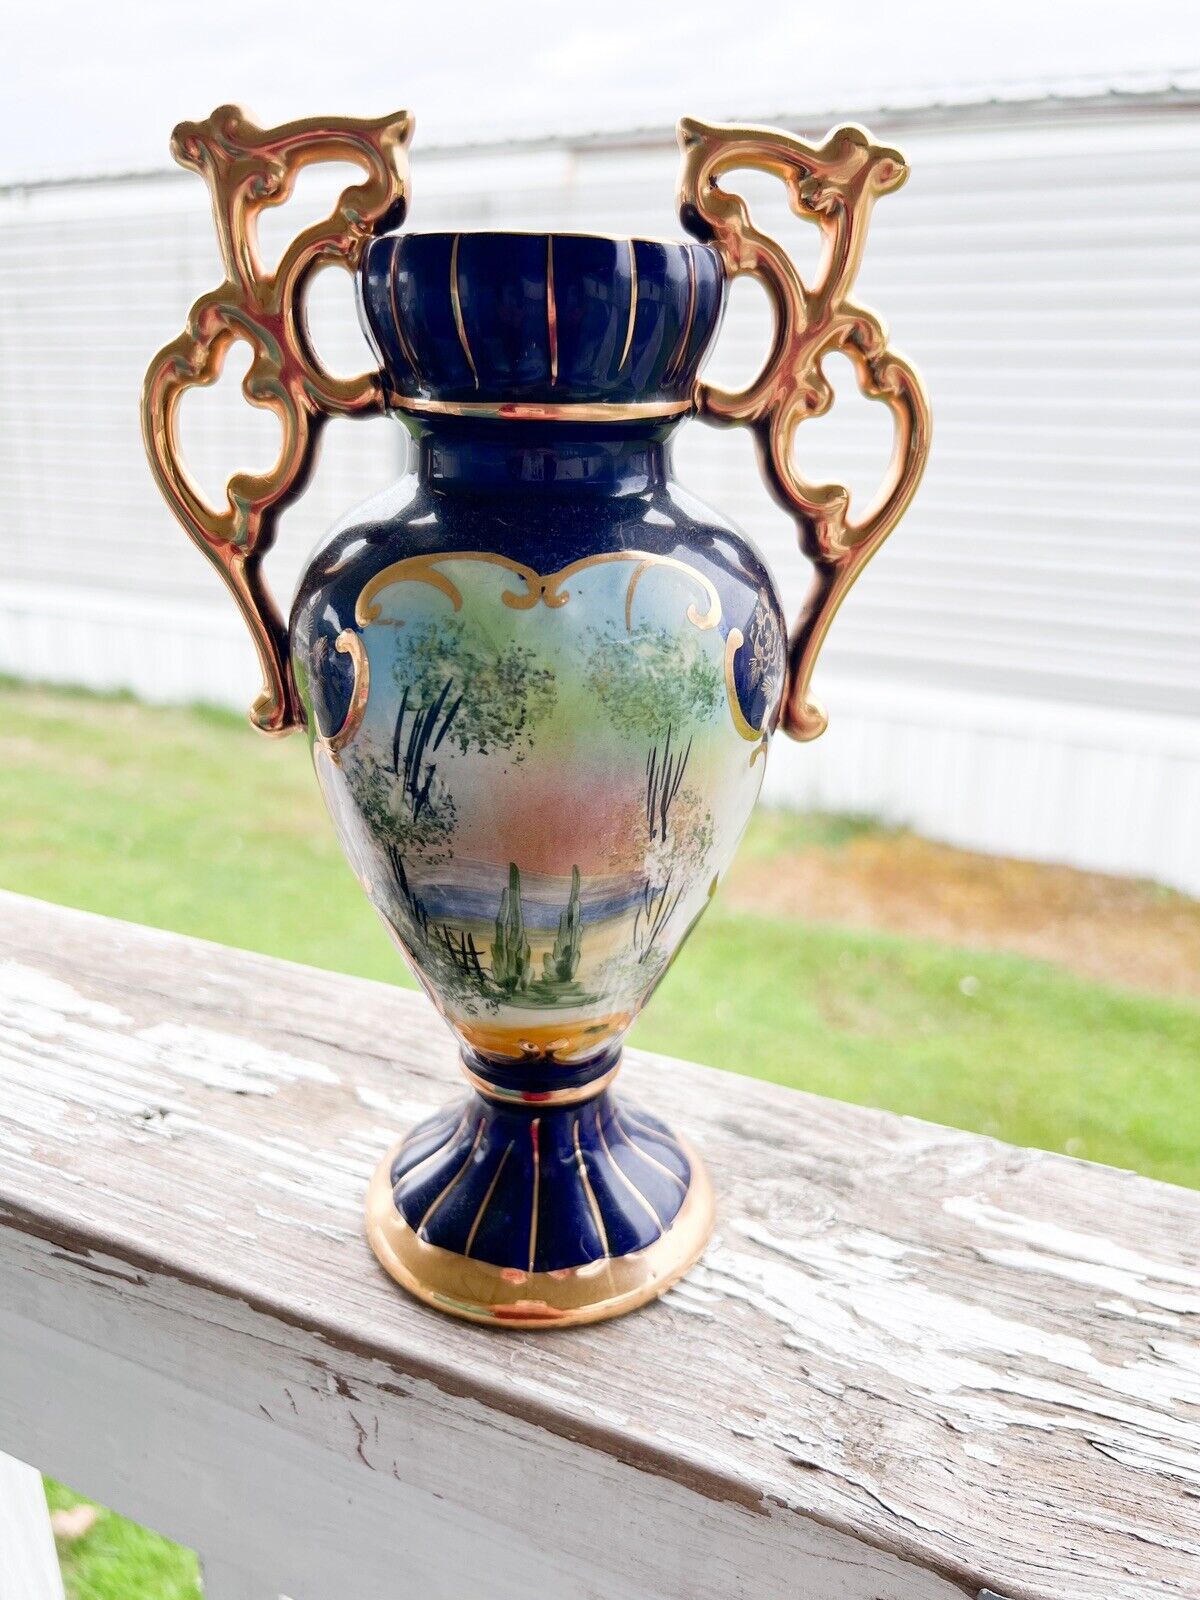 Blue Gold Antique Vase With Pretty Scenery Design Hand Painted Shabby Ornate